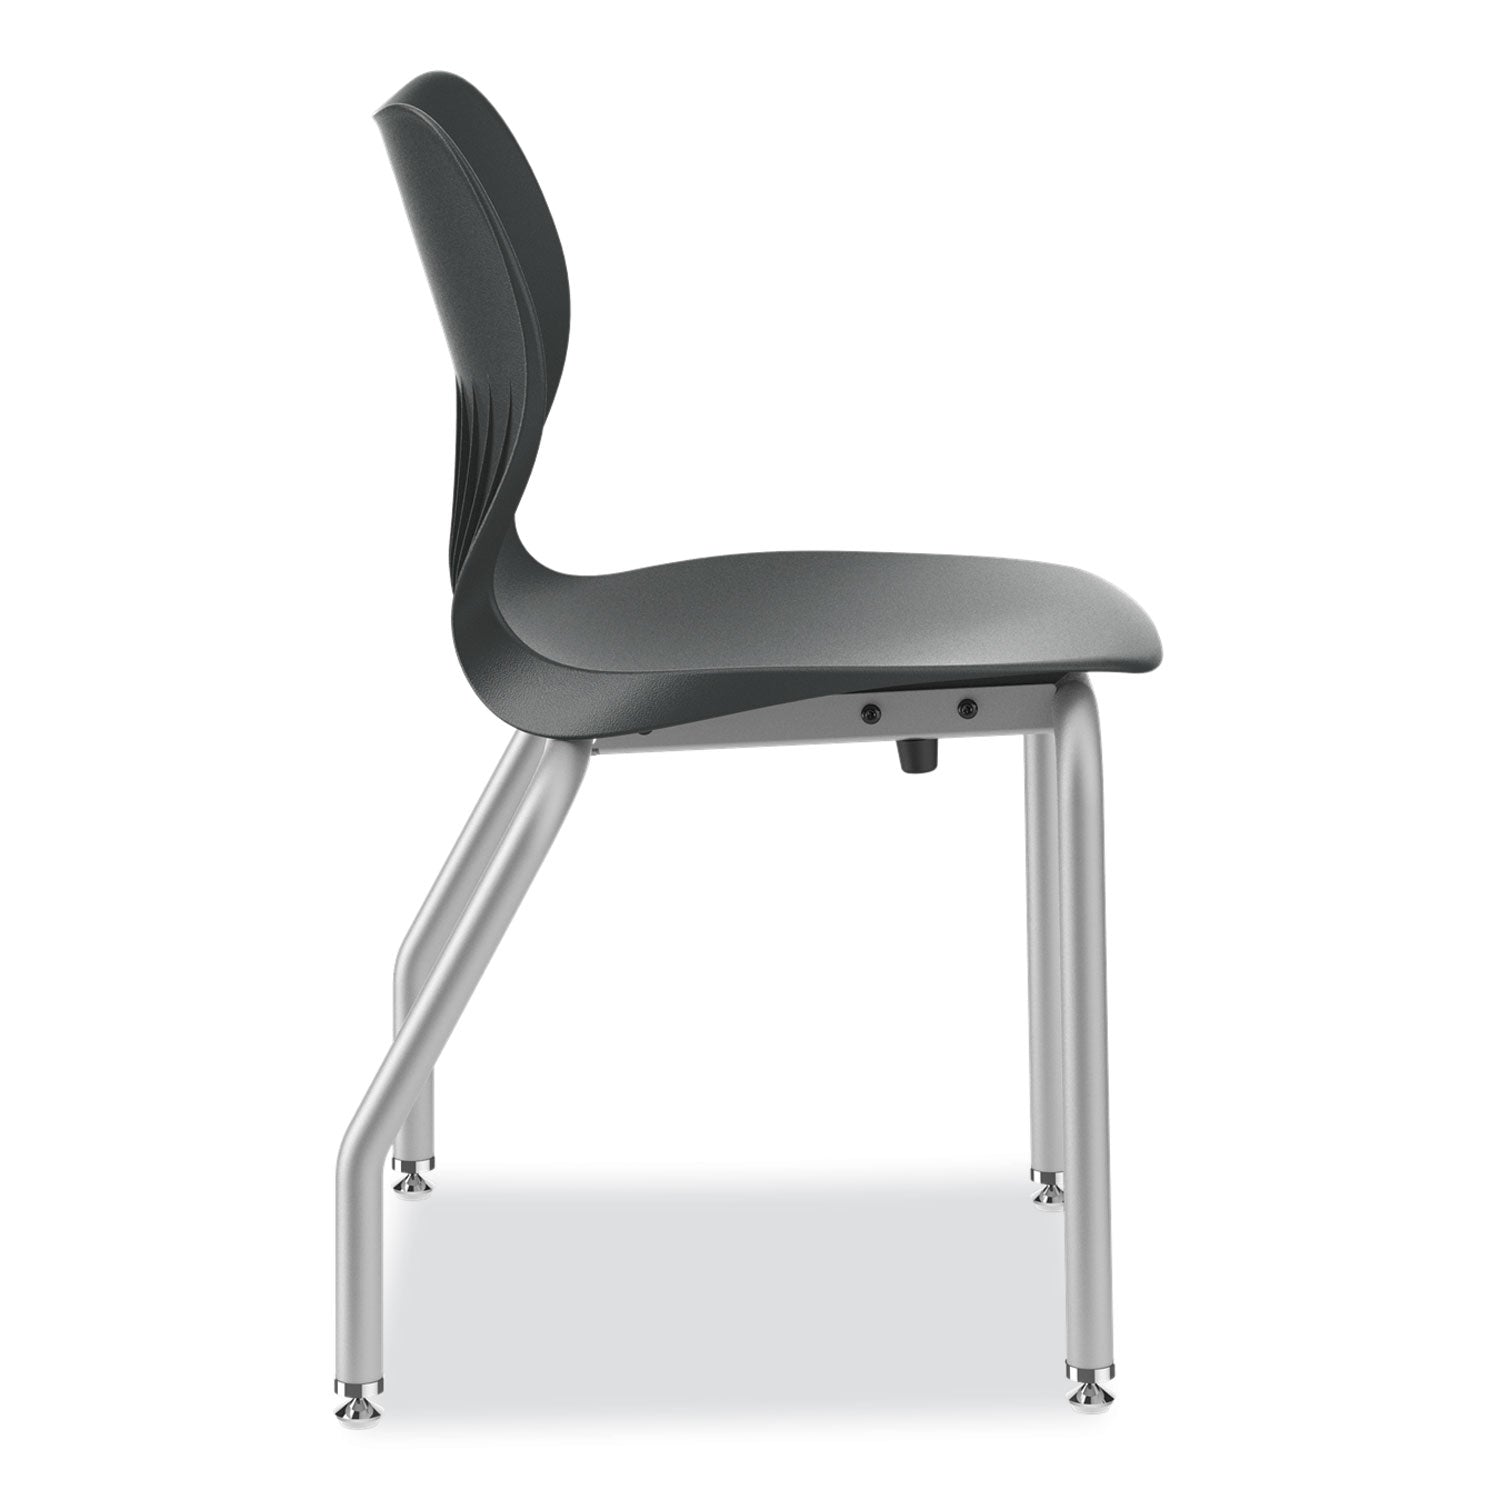 smartlink-four-leg-chair-supports-up-to-275-lb-18-seat-height-lava-seat-back-platinum-base-ships-in-7-10-business-days_honsl4l18elap - 2